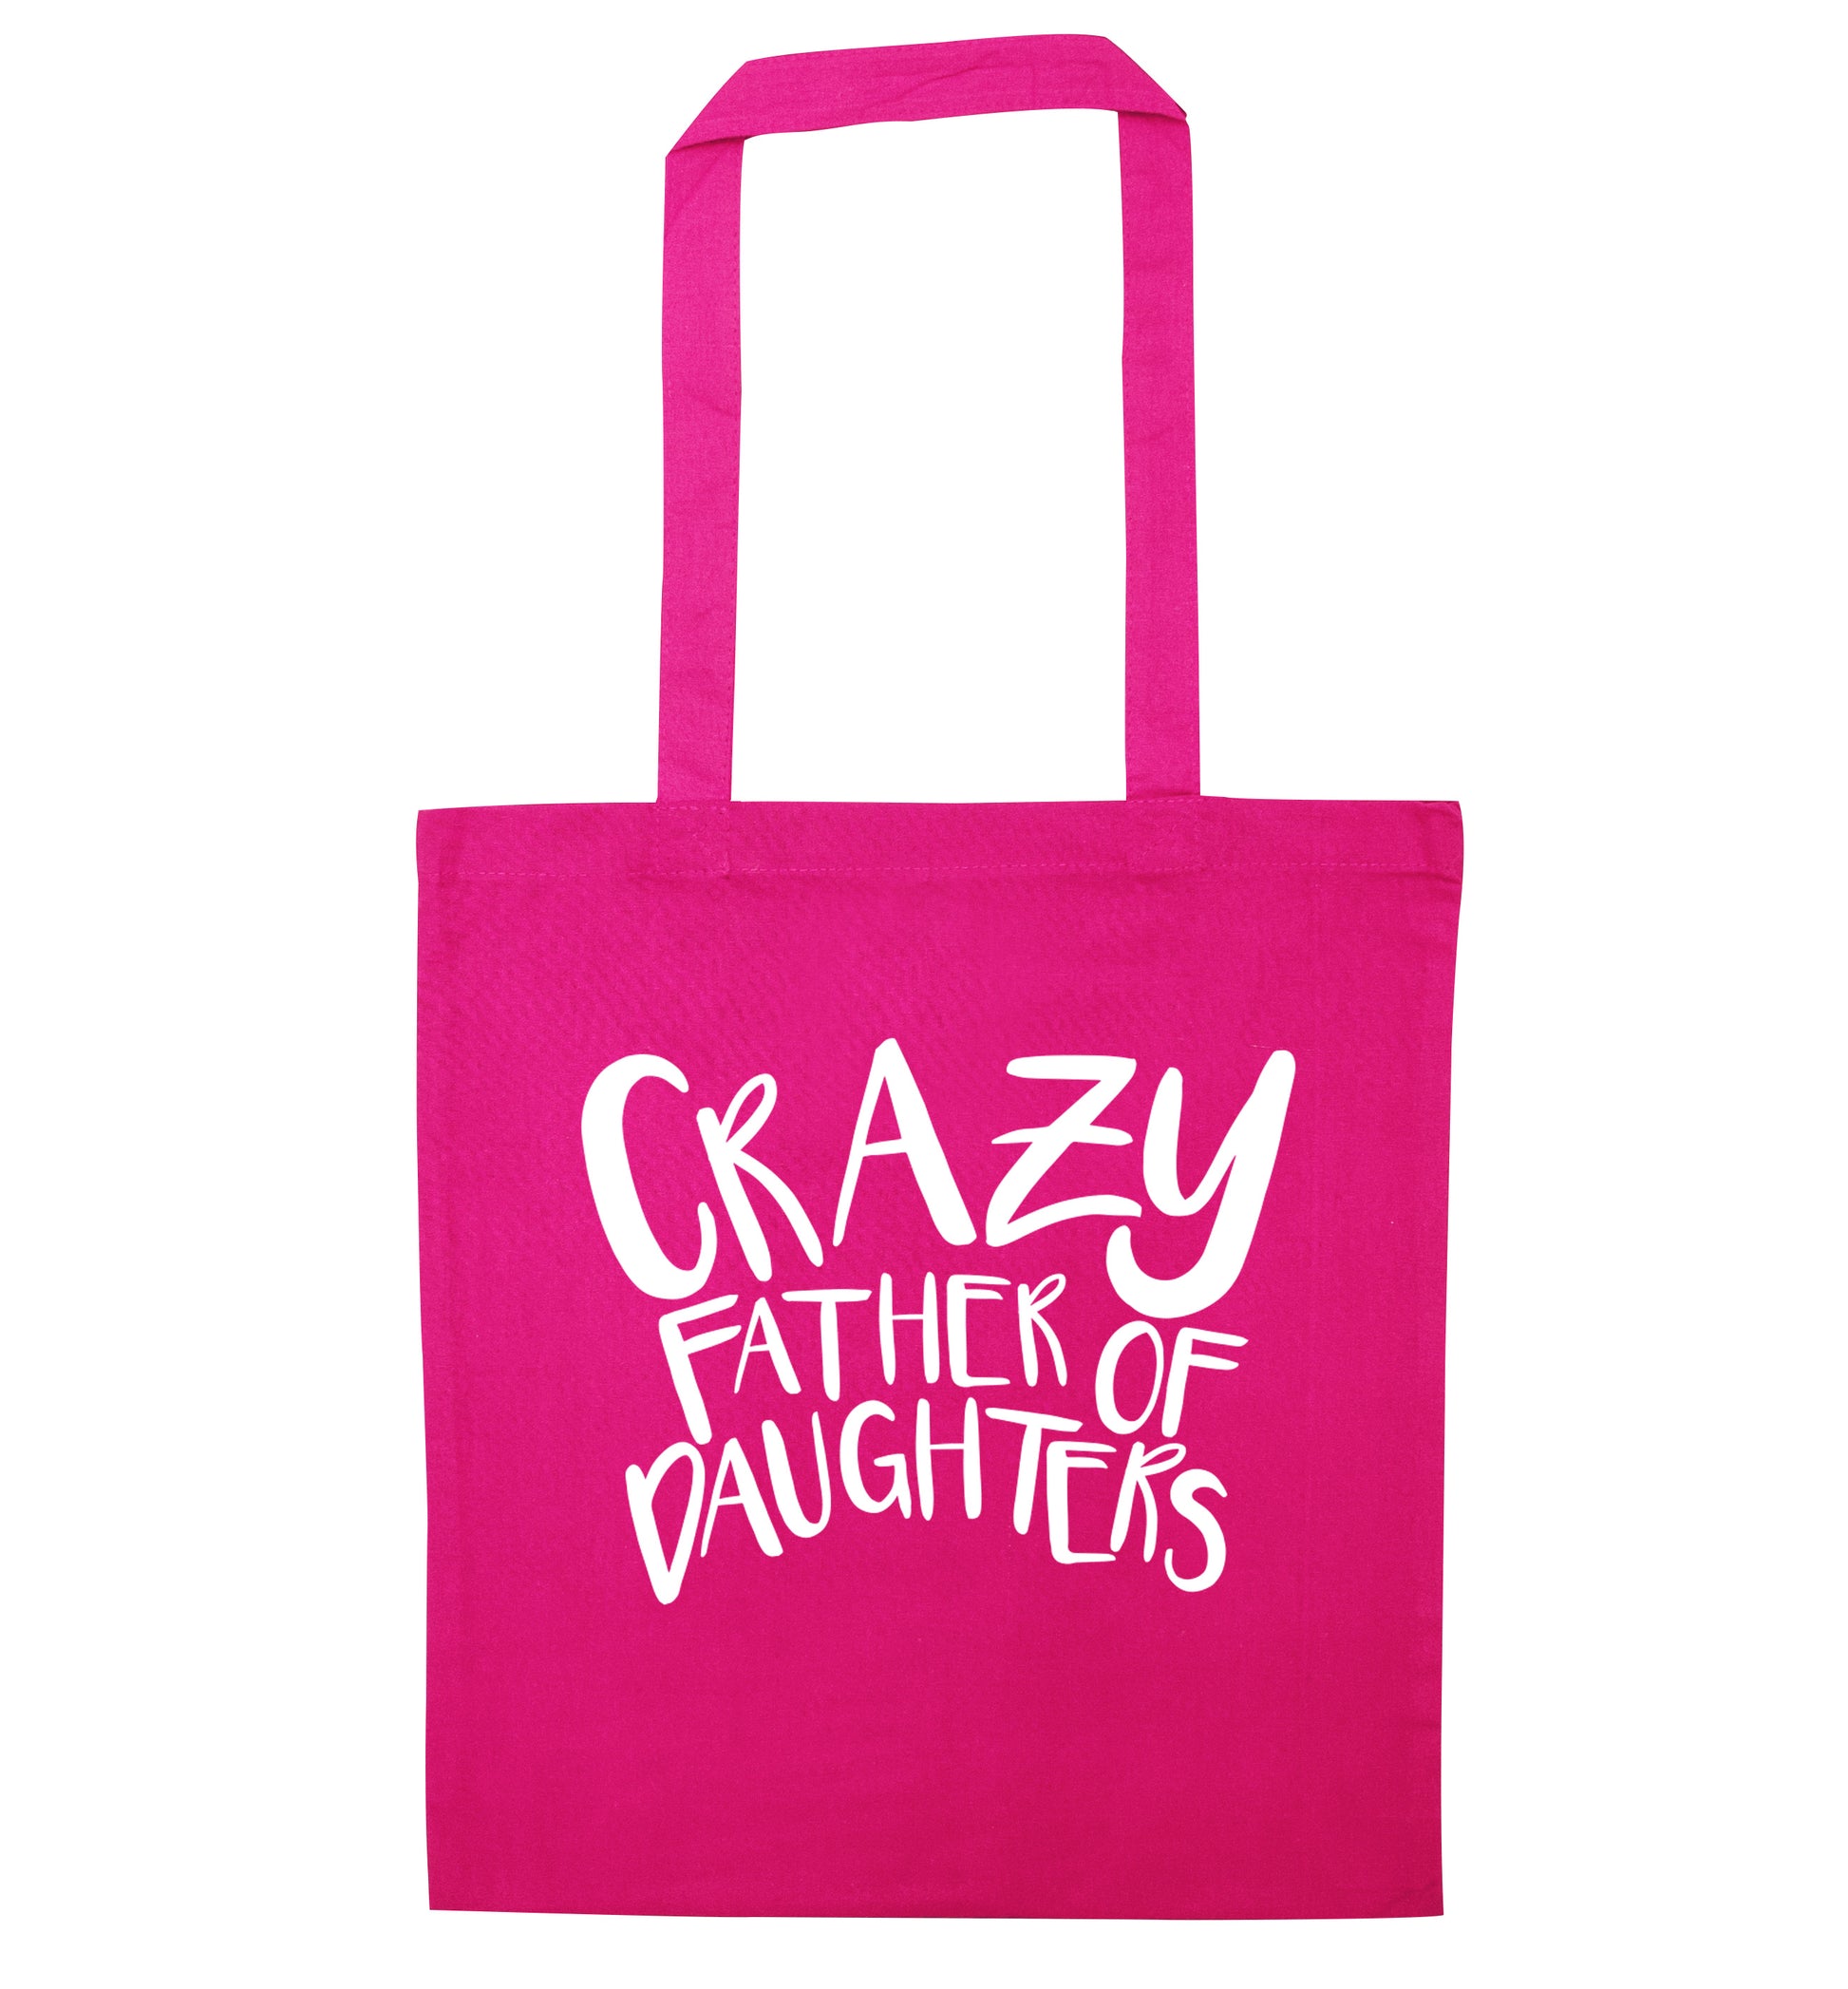 Crazy father of daughters pink tote bag